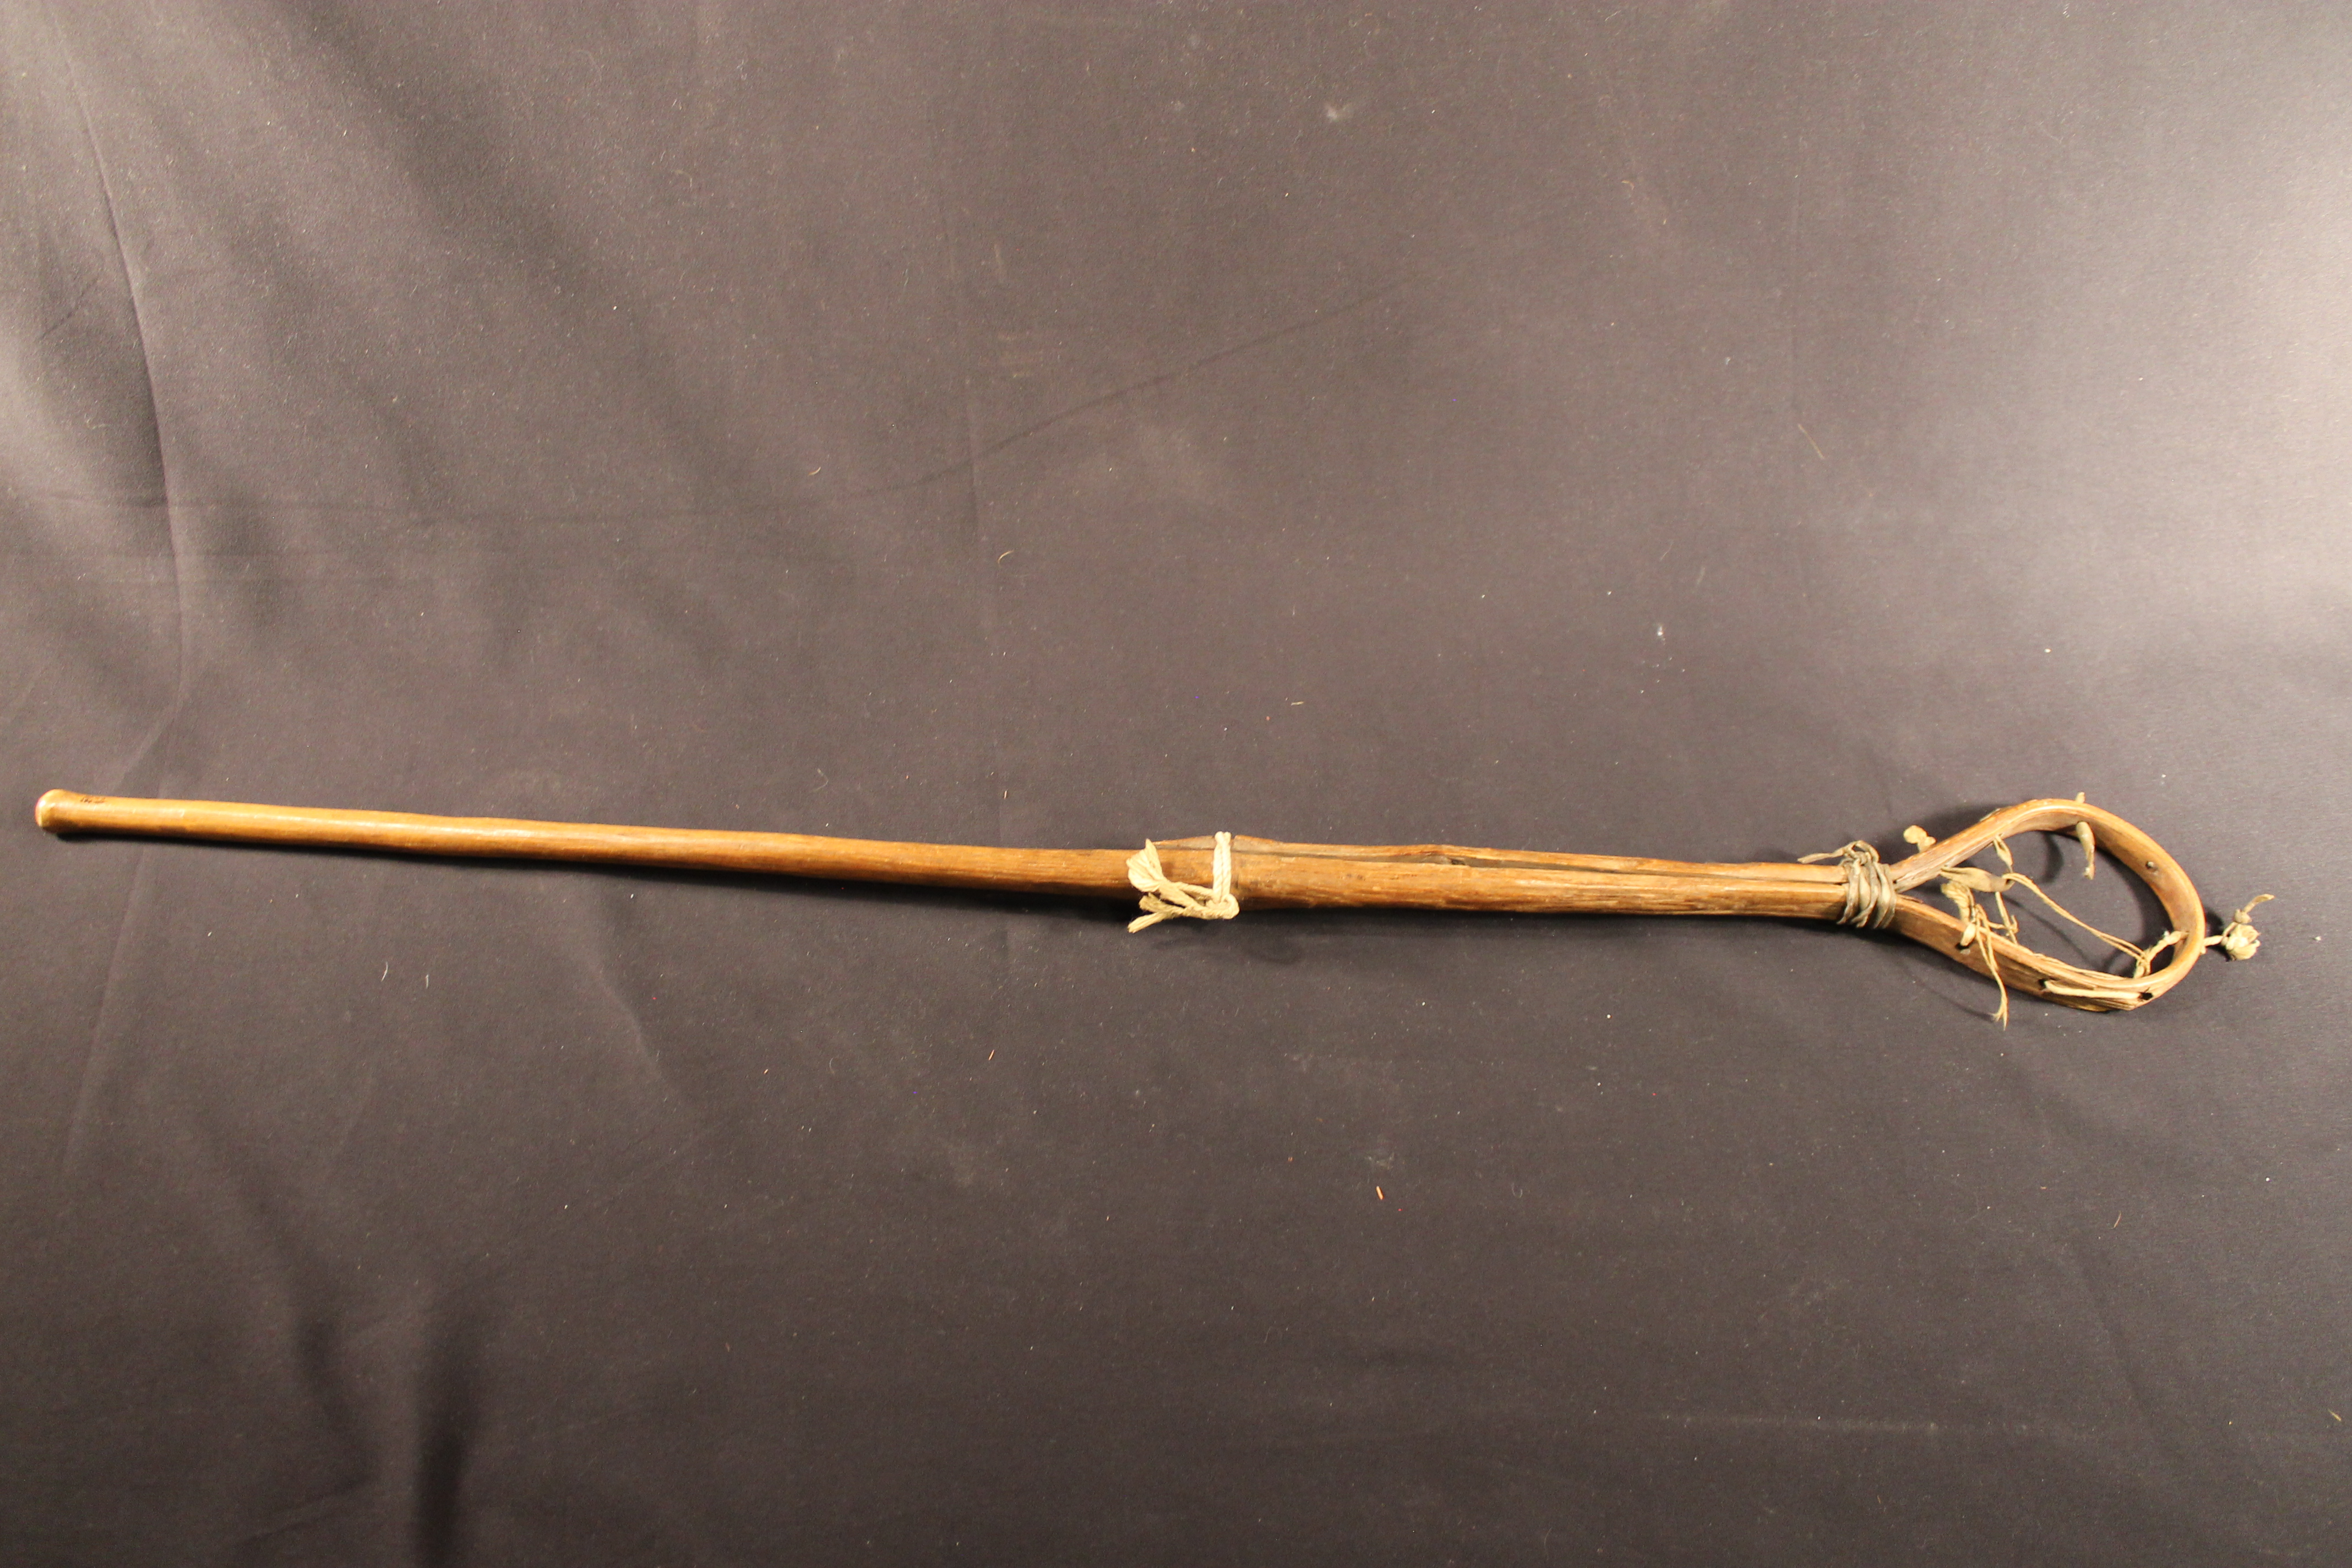 Lacrosse stick made of wood that has been bent into a loop at one end with a leather net in the center.